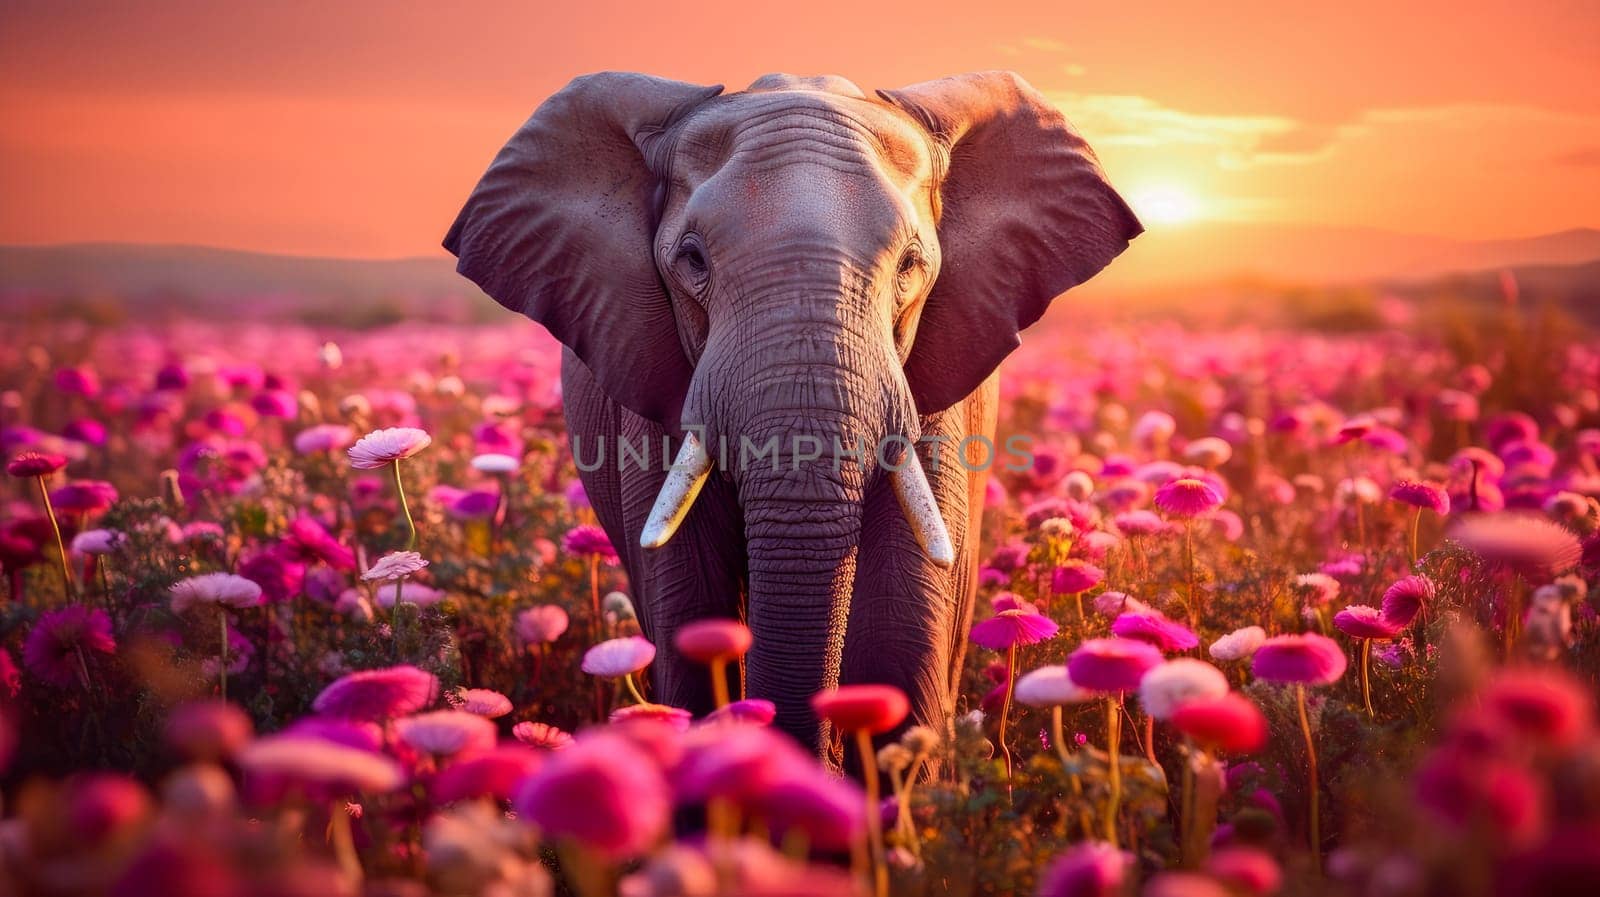 Cute, beautiful elephant in a field with flowers in nature, in sunny pink rays. by Alla_Yurtayeva